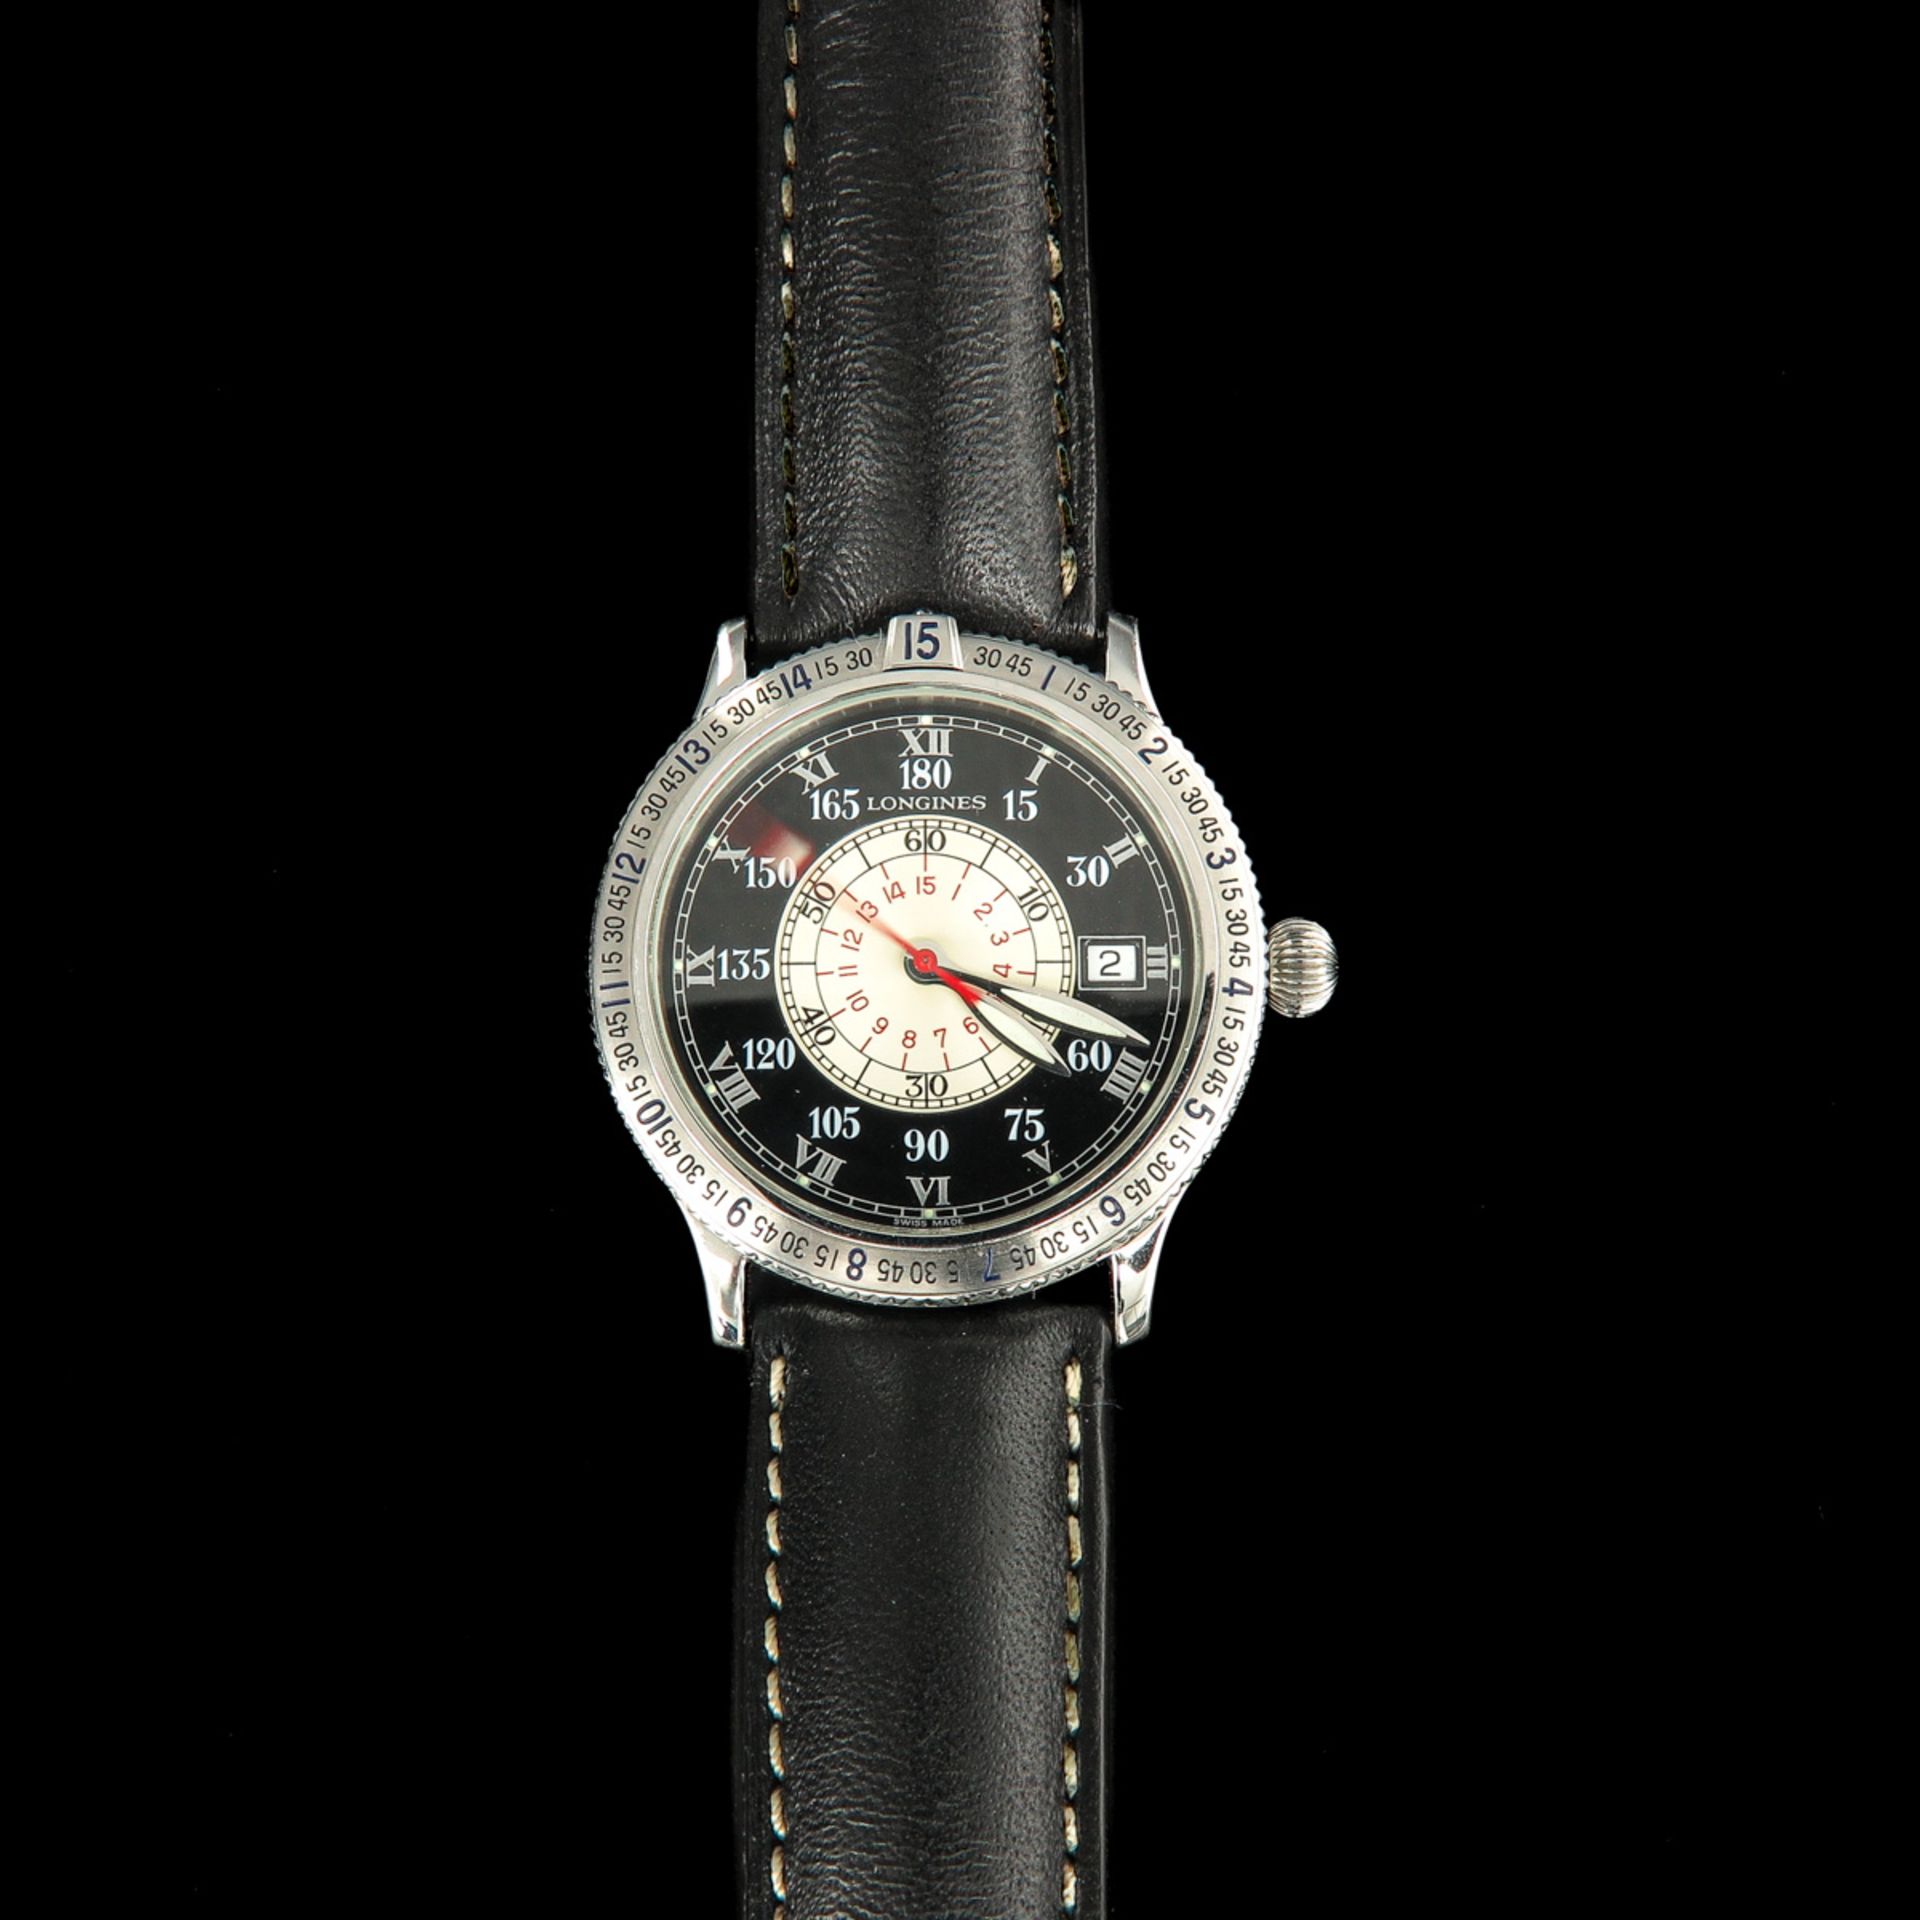 A Mens Longines Watch - Image 3 of 6